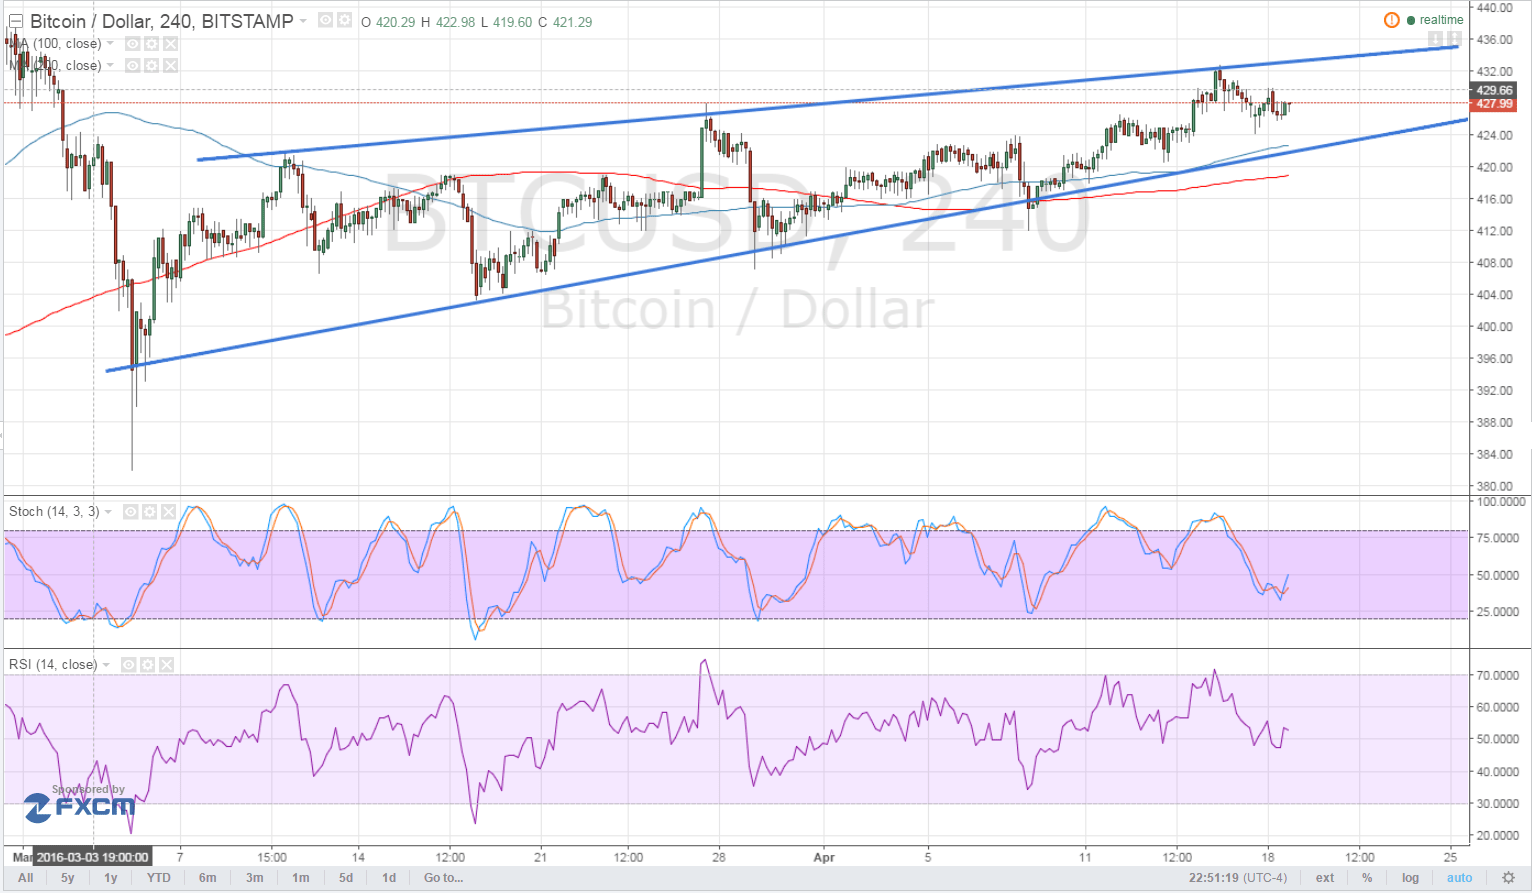 Bitcoin Price Technical Analysis for 04/19/2016 - Still Stuck in a Wedge!